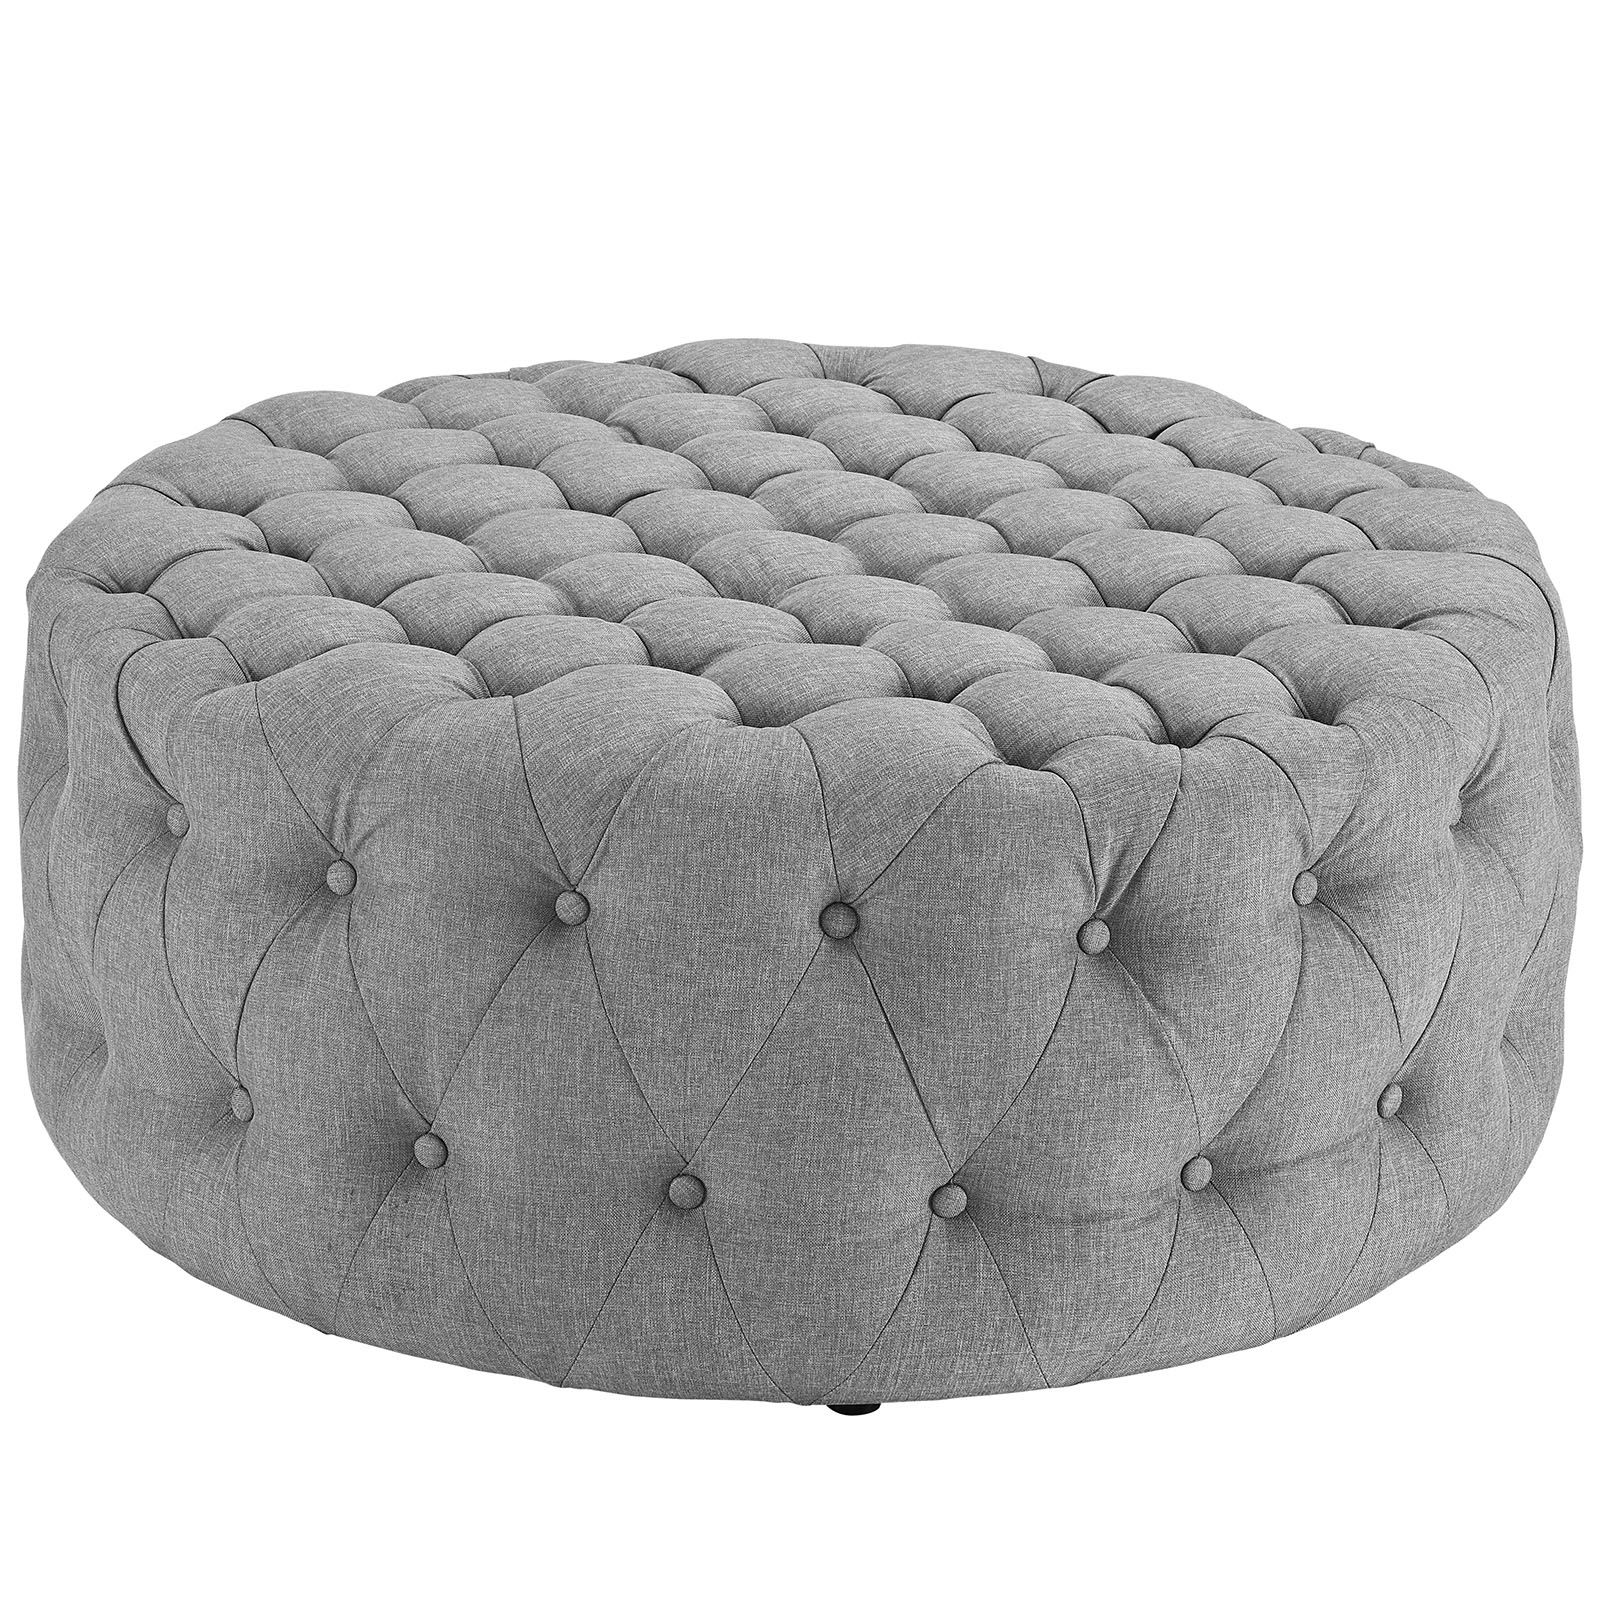 Amour Upholstered Fabric Ottoman Light Gray For Light Gray Cylinder Pouf Ottomans (View 7 of 20)